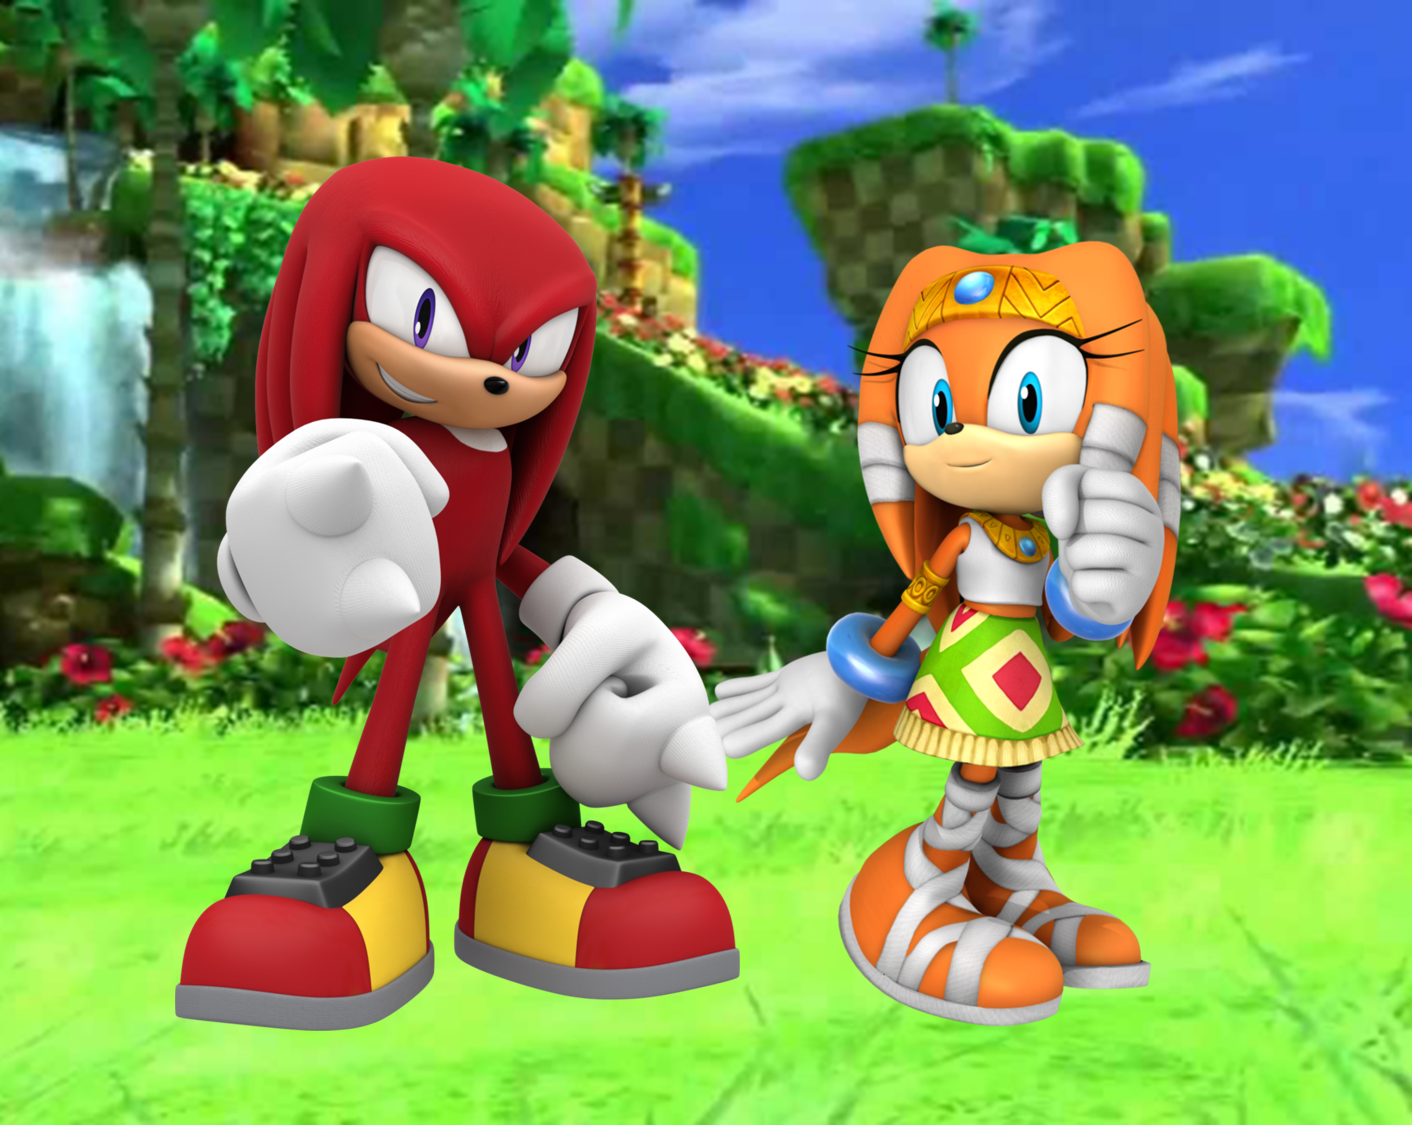 Knuckles And Tikal Echidna Wallpaper By 9029561 On DeviantArt.